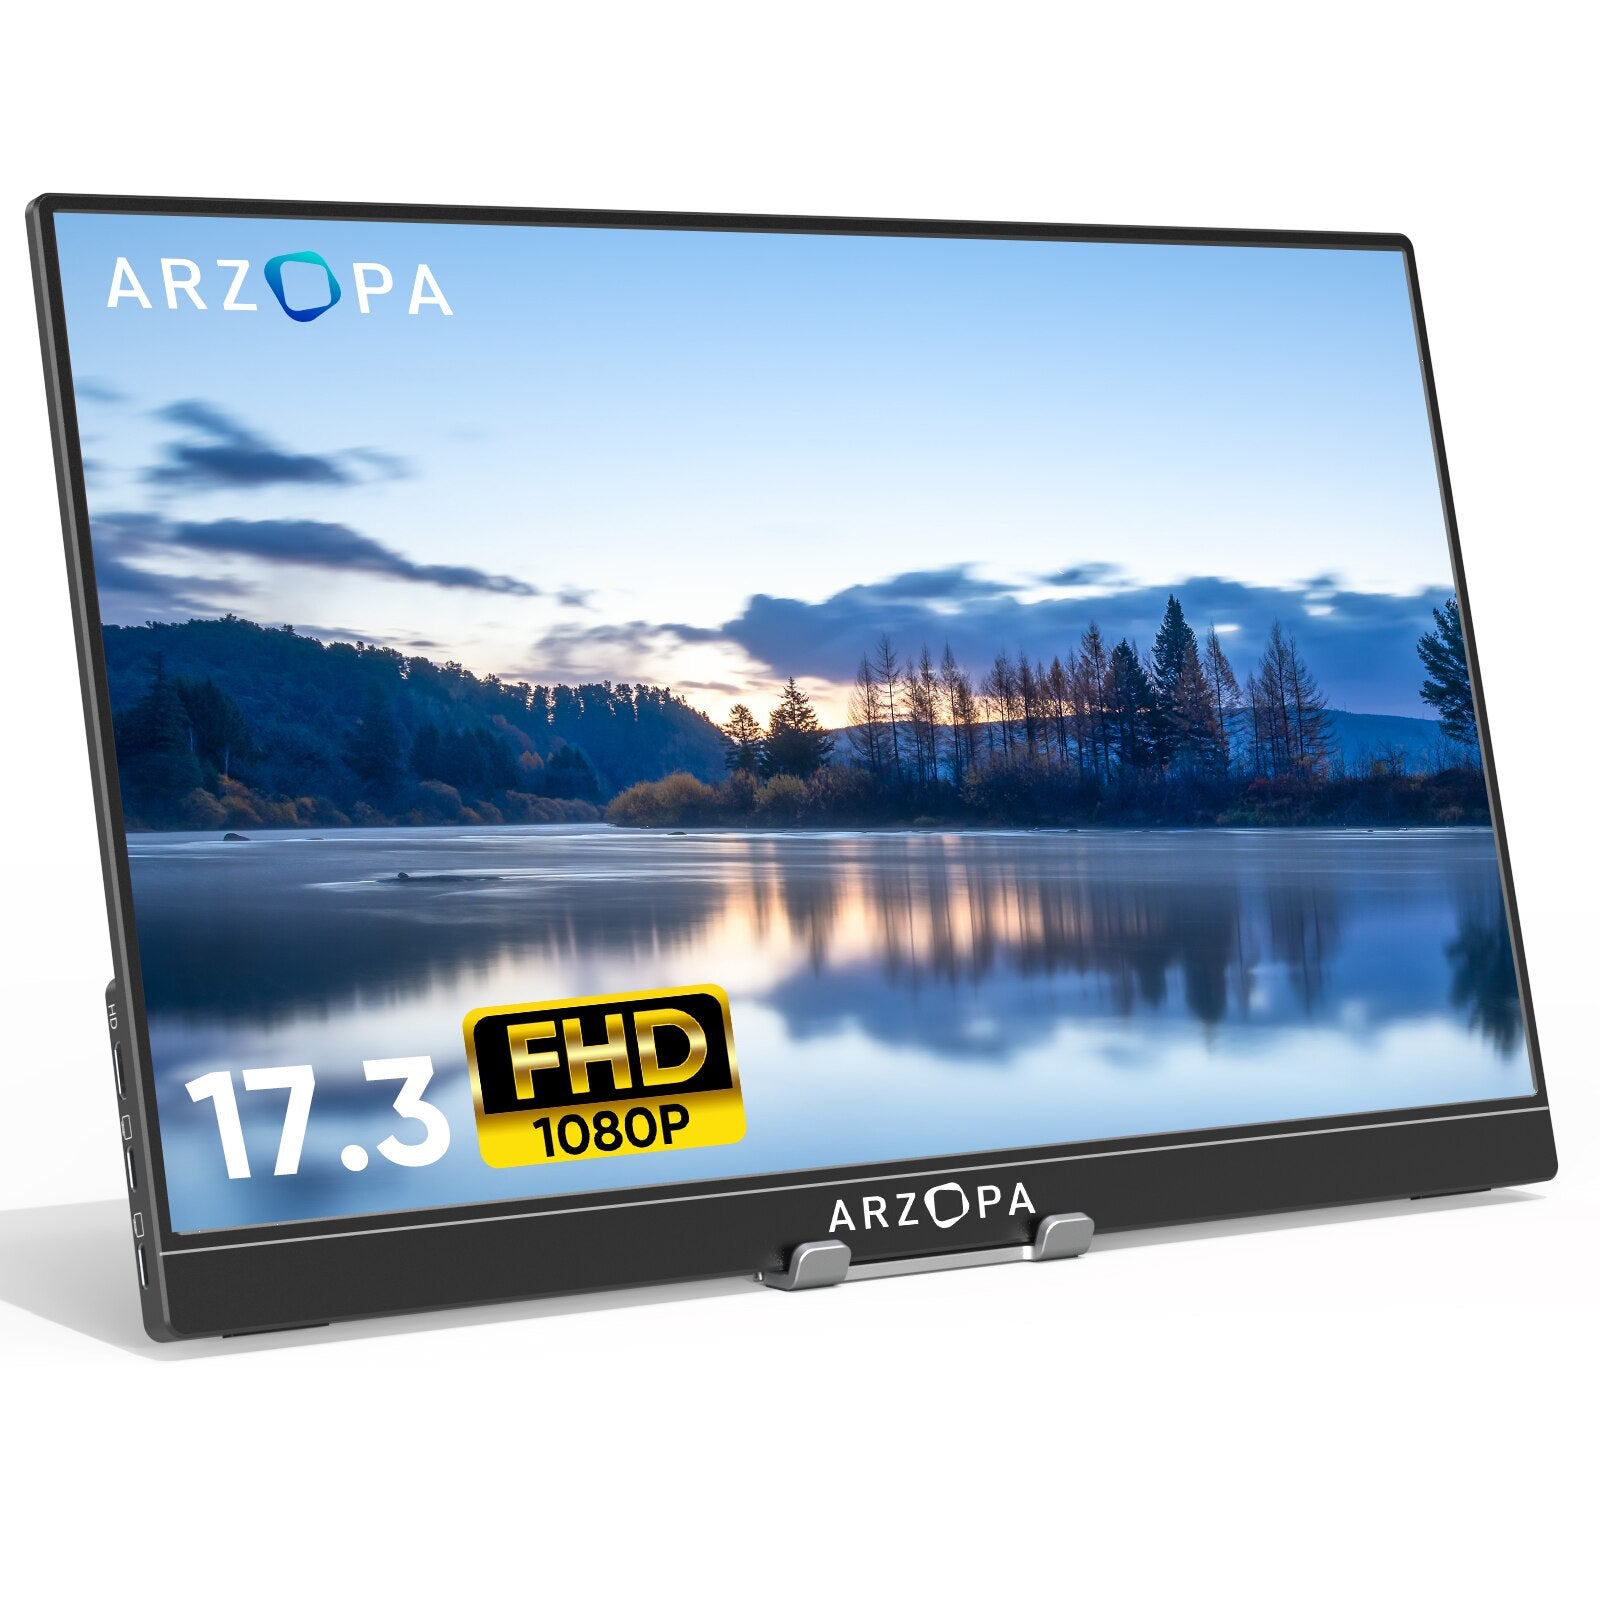 ARZOPA 17.3" FHD Portable Monitor 1080p External Display IPS Screen USB C HDMI Gaming Monitor for PC Phone Mac Xbox PS5 Switch